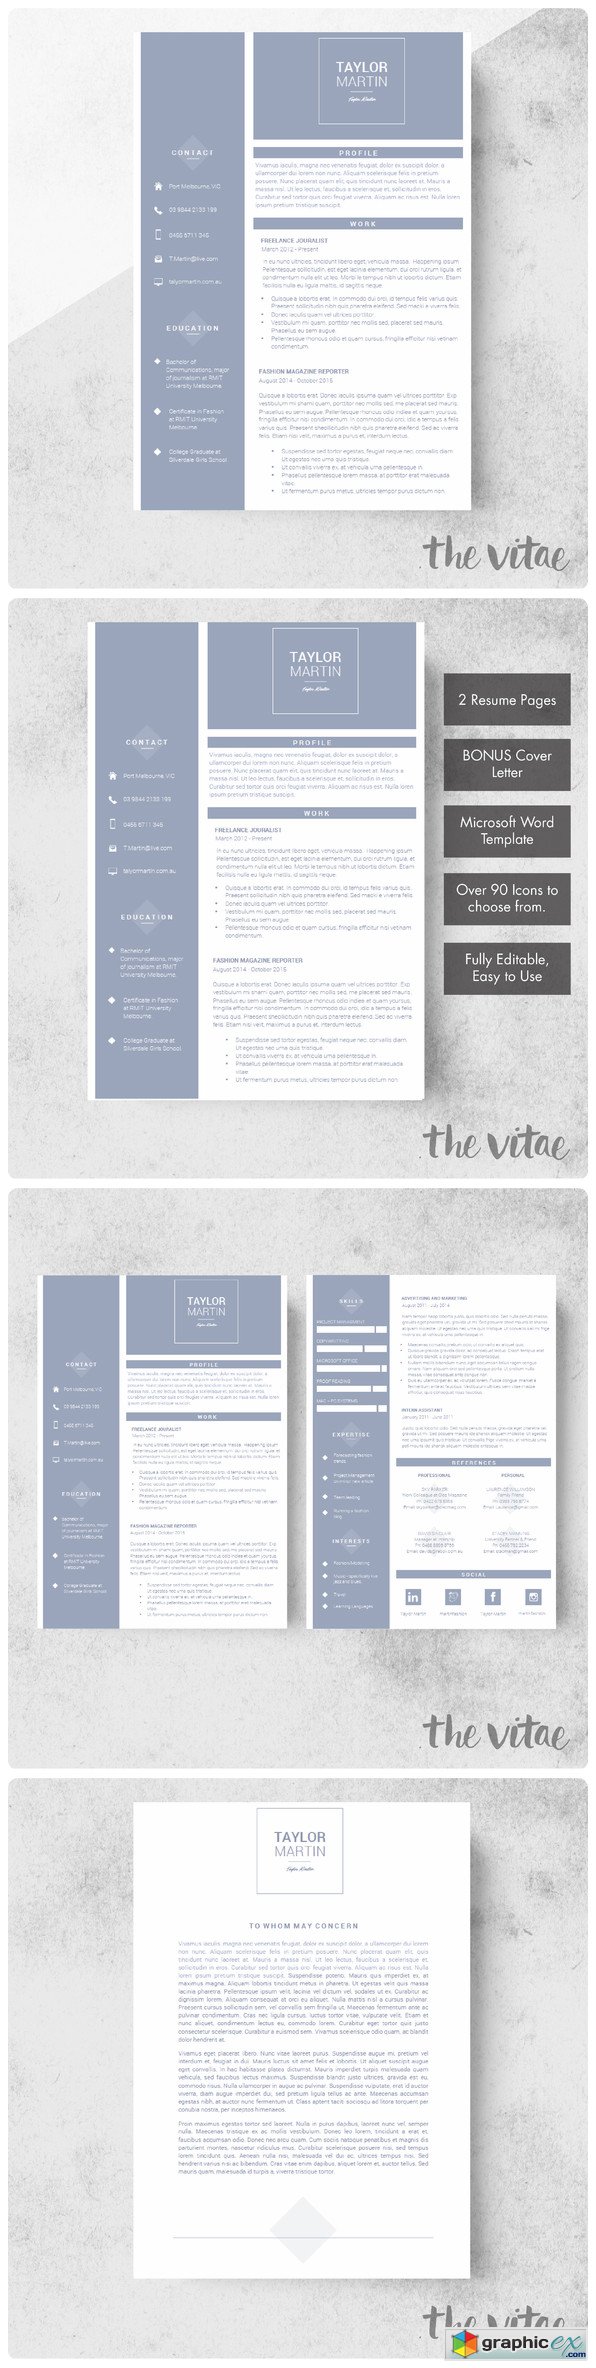 Sailor Resume Template Cover Letter